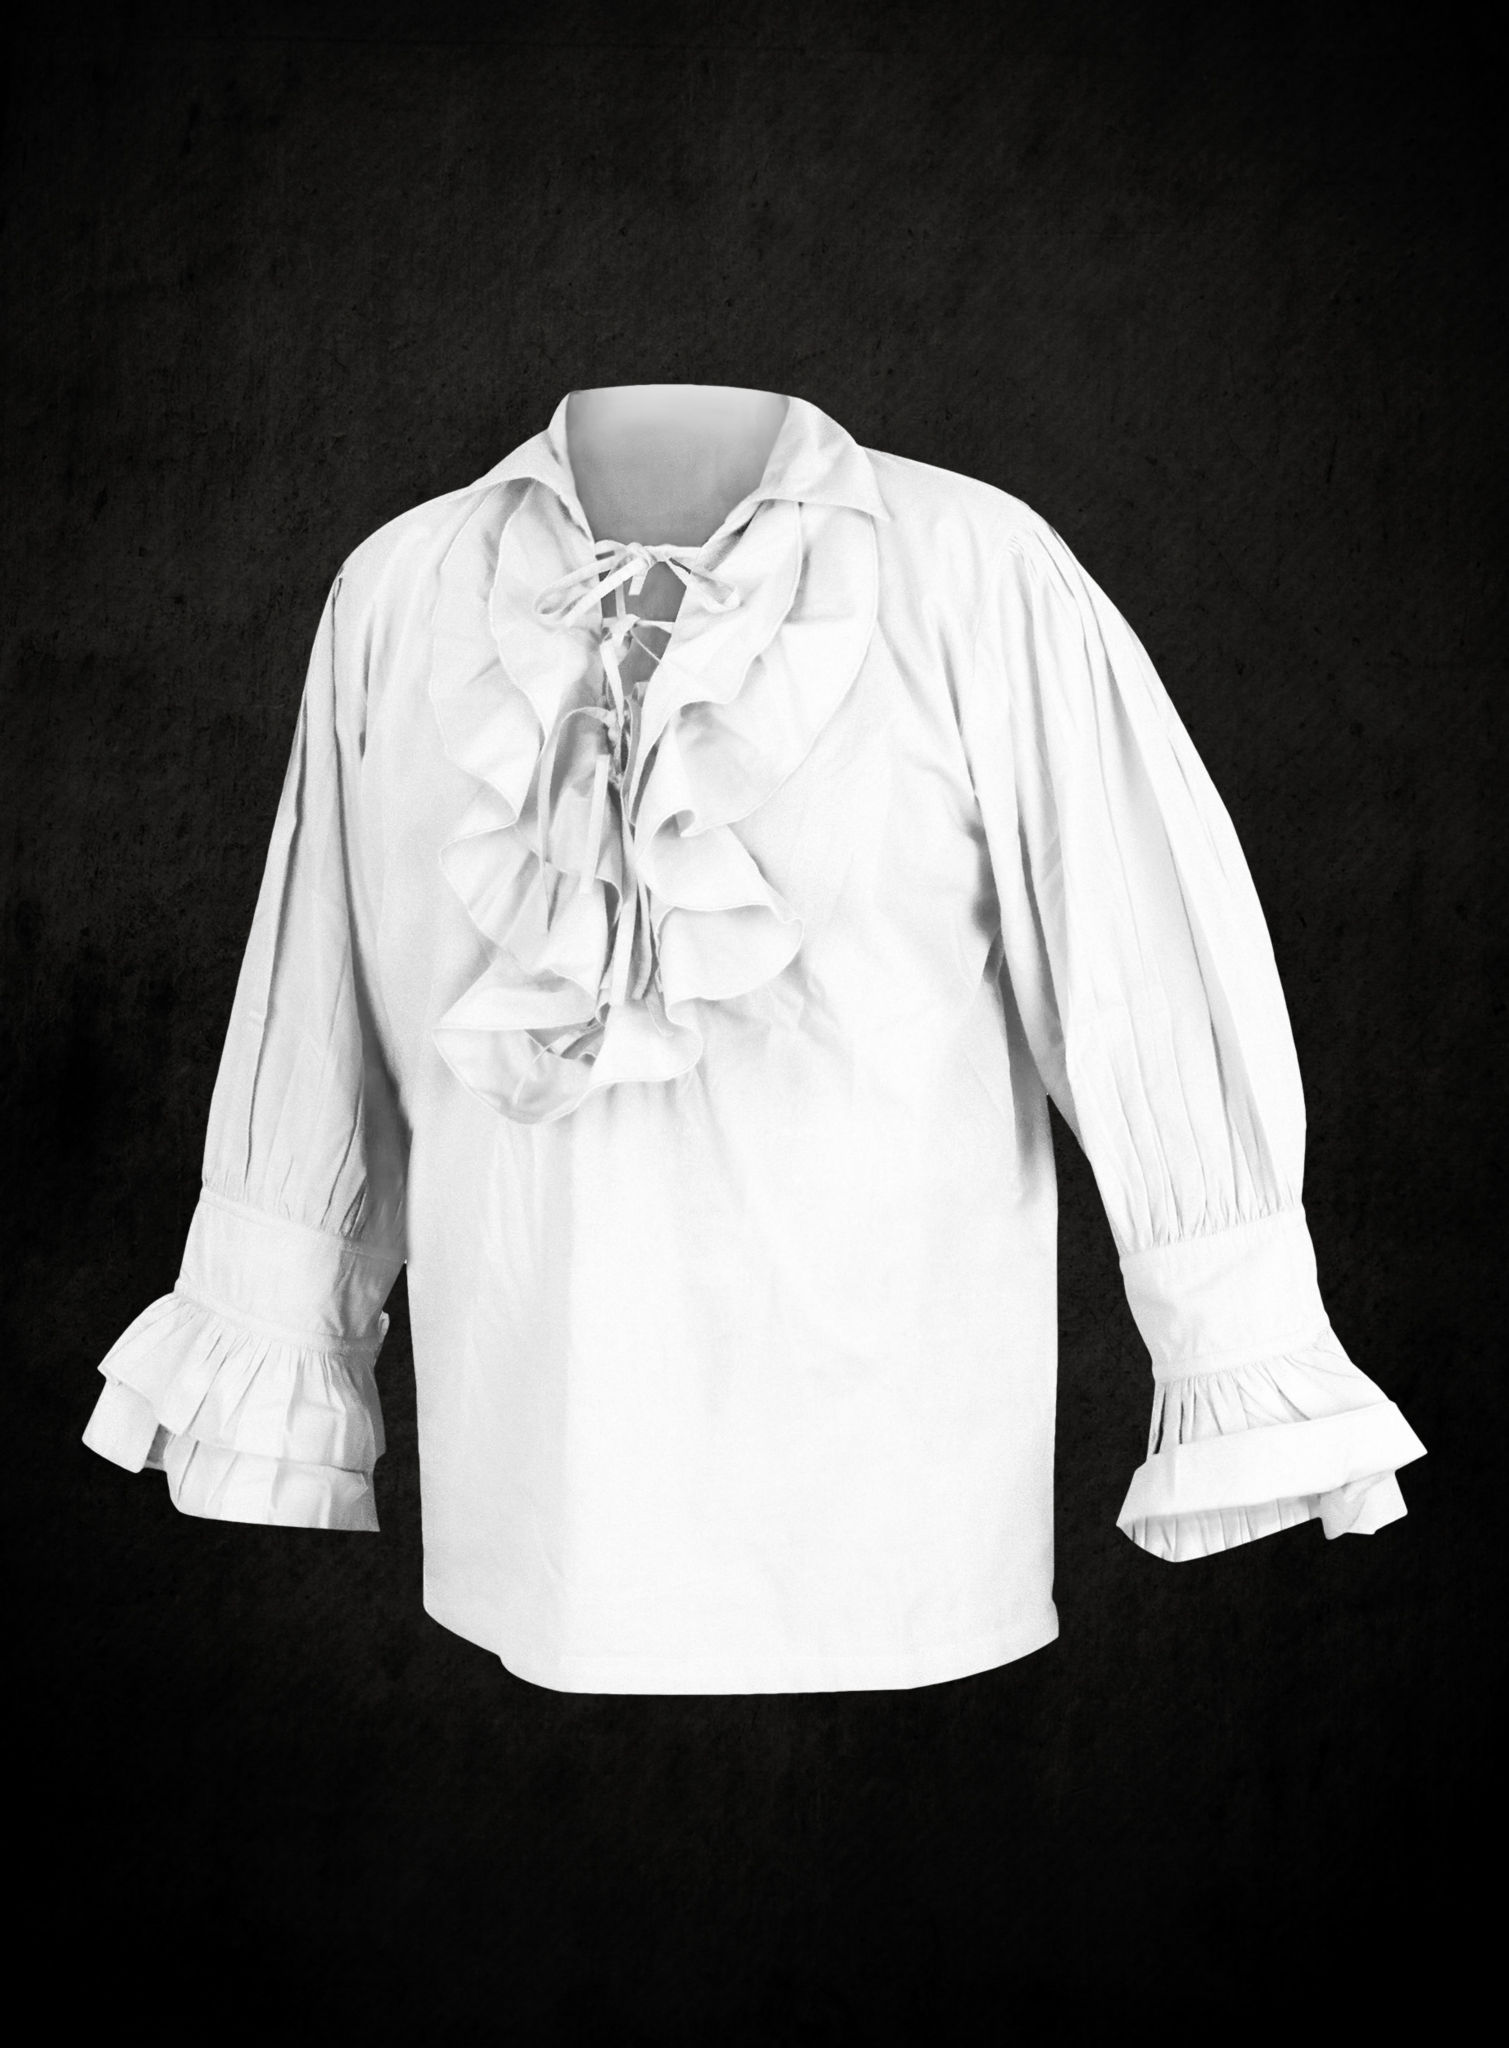 White Poet Shirt - High quality shirt with ruching and lacing